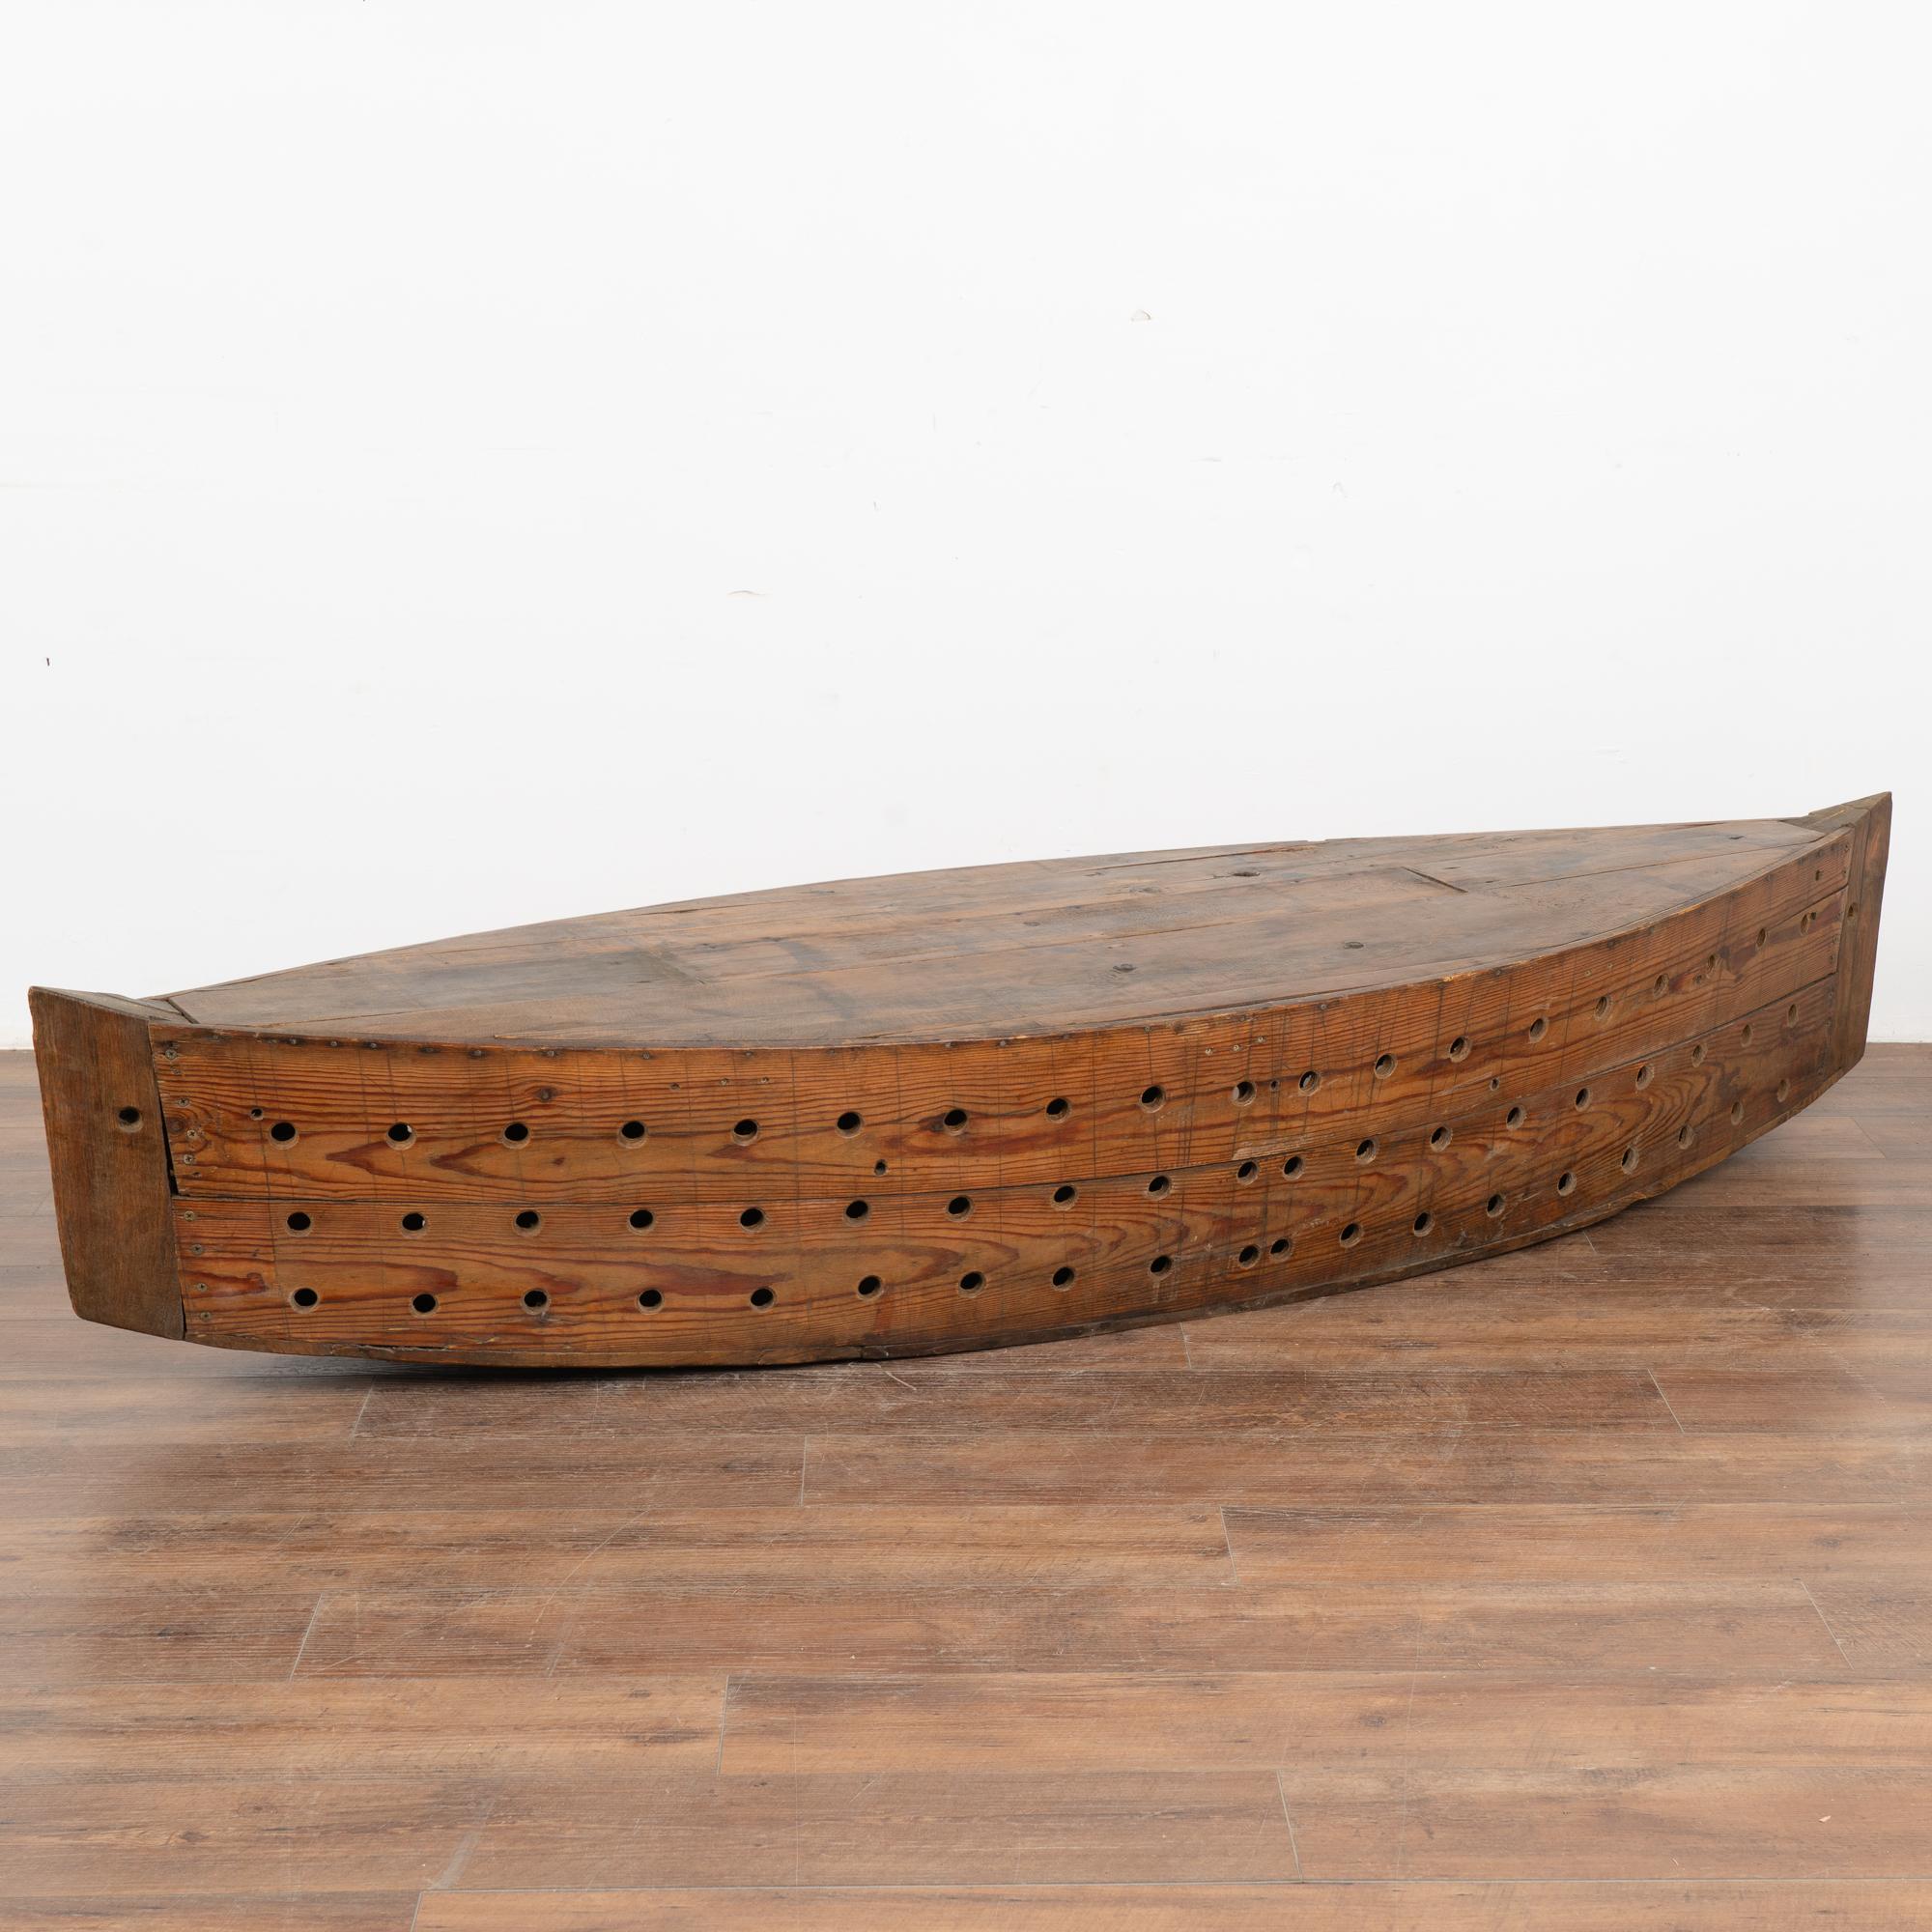 The many holes in this large 7' model boat served a specific purpose; it was used while fishing as a type of oversized creel to keep fish alive. The large size makes it a unique decorative statement piece perfect for a home near water.
Note the